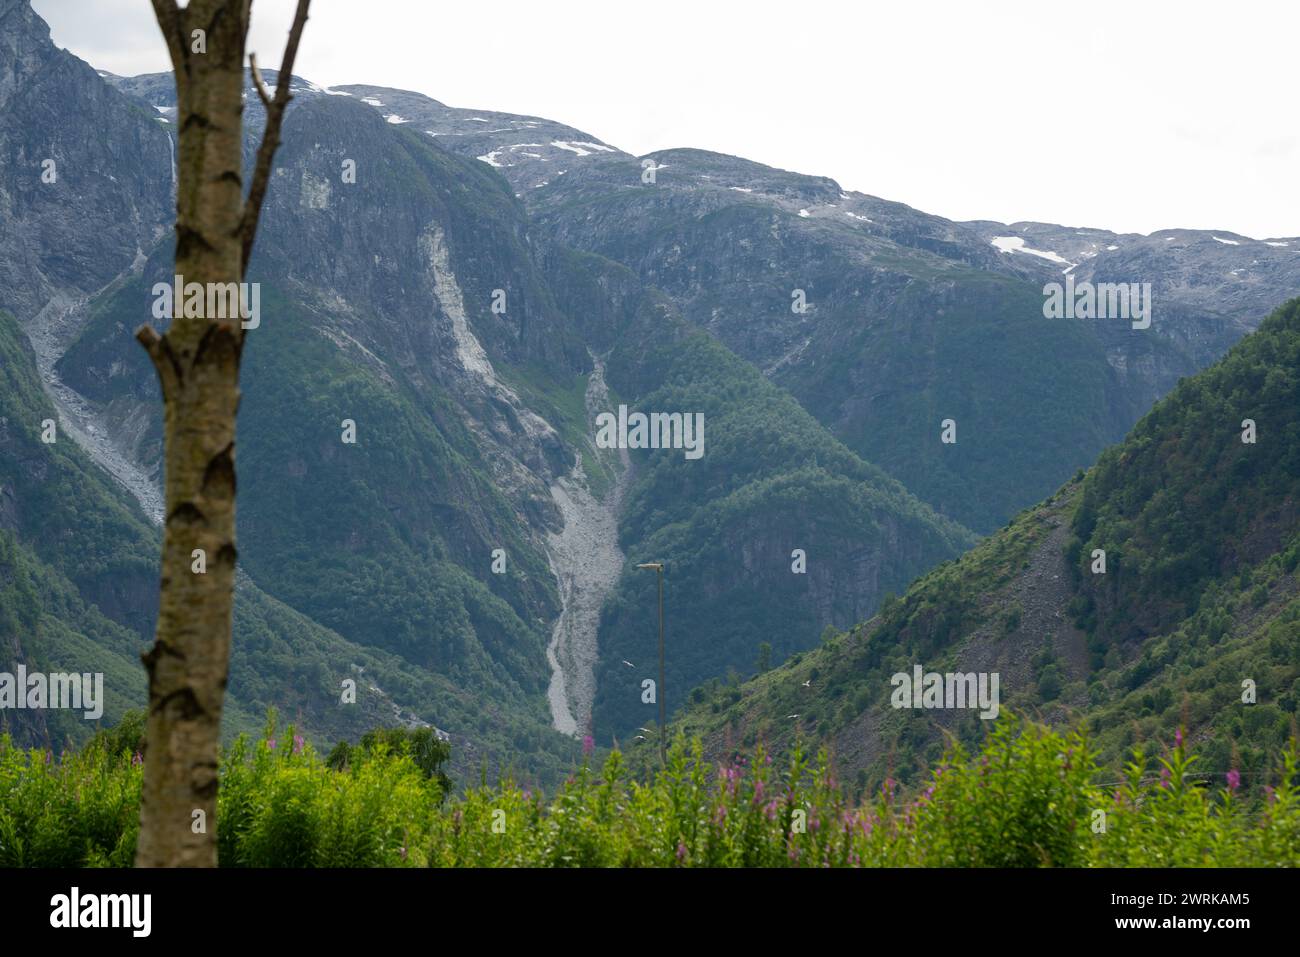 Nature view of Norwegian fjord mountains with rocks on which green trees grow and there was an avalanche of snow. Stock Photo